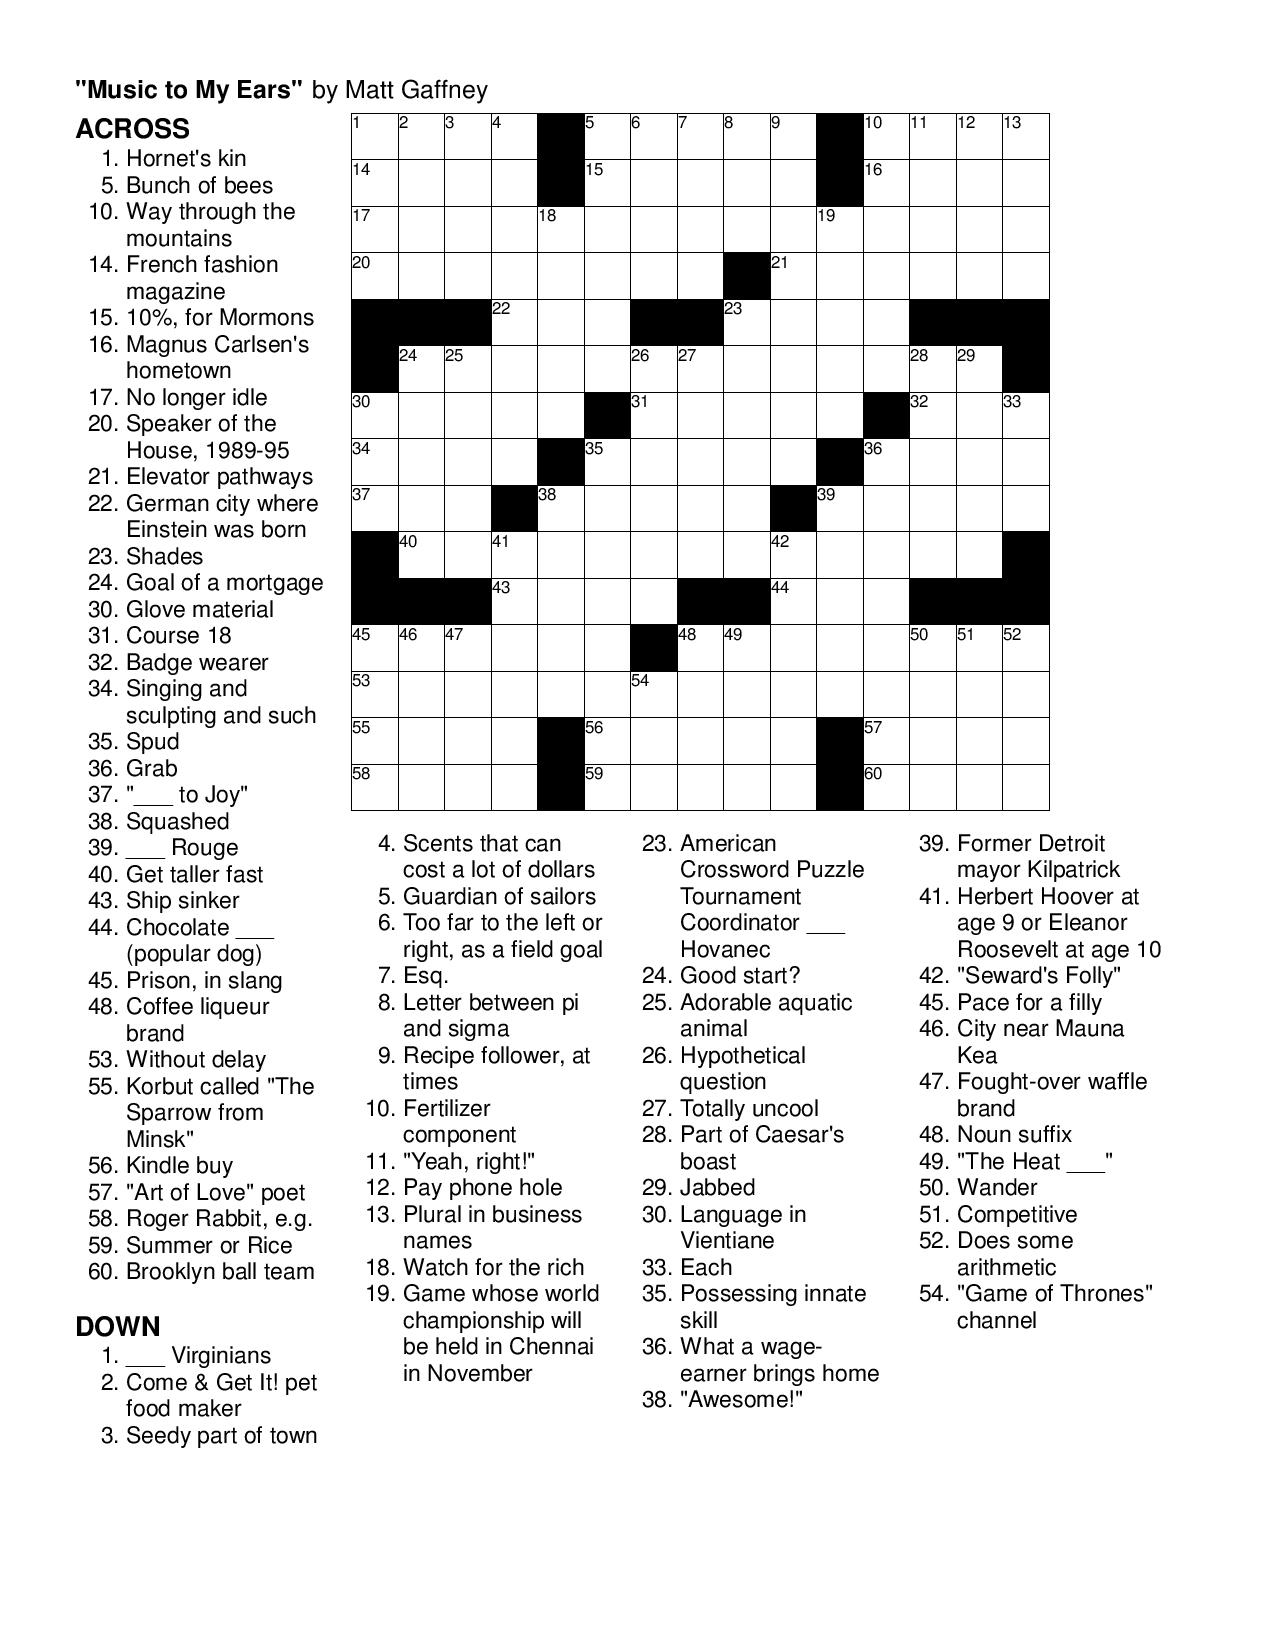 Mgwcc #279 — Friday, October 4Th, 2013 — “Music To My Ears” | Matt - Printable Music Crossword Puzzles